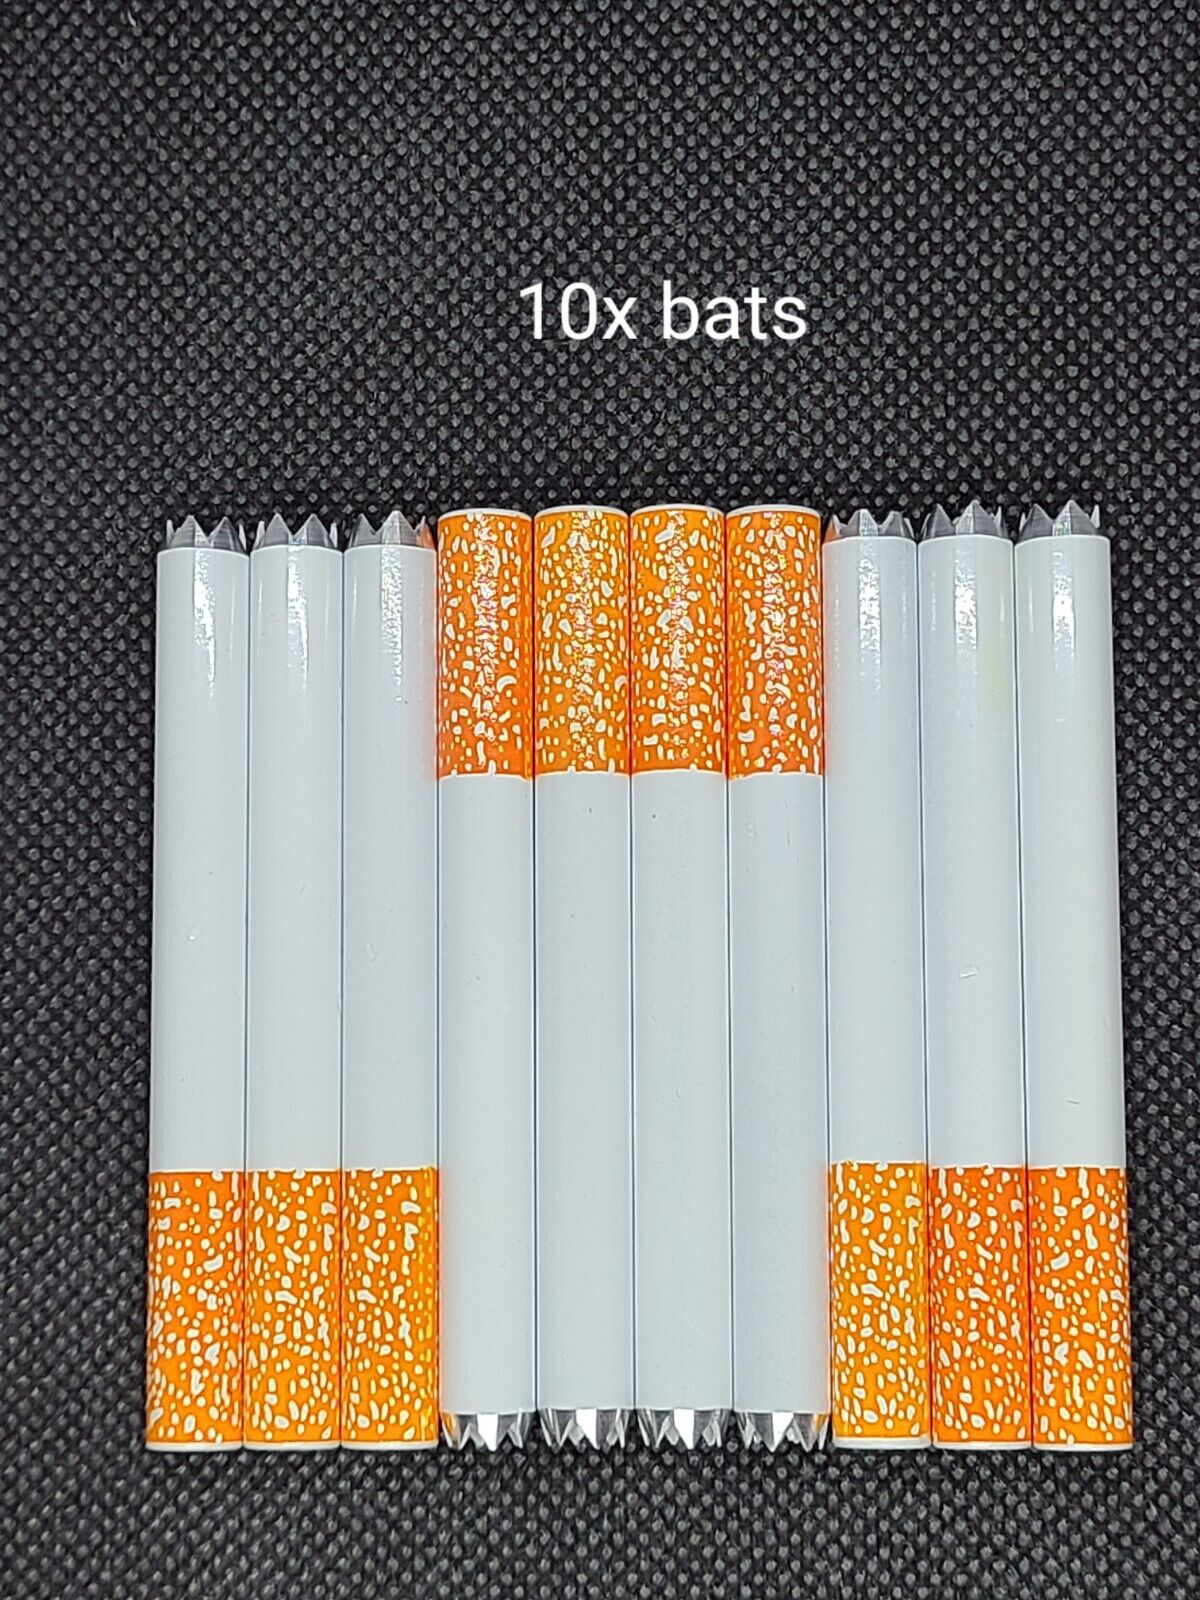 10x Metal Sawtooth One Hitter Dugout Pipe Cigarette Bat Large 3